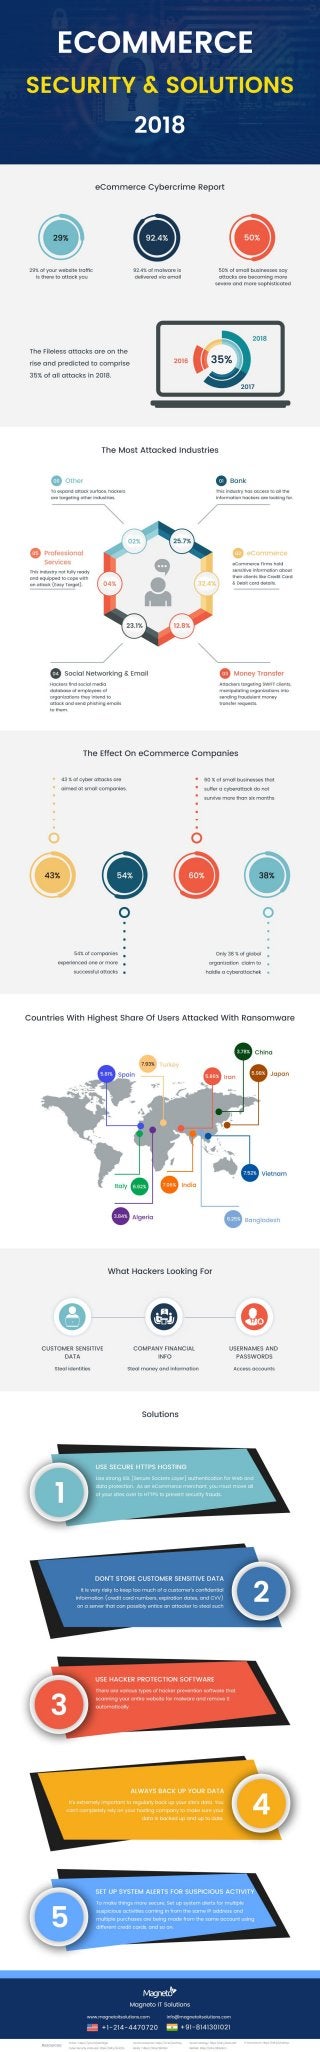 Infographics: eCommerce Security Issues & Solutions in 2018